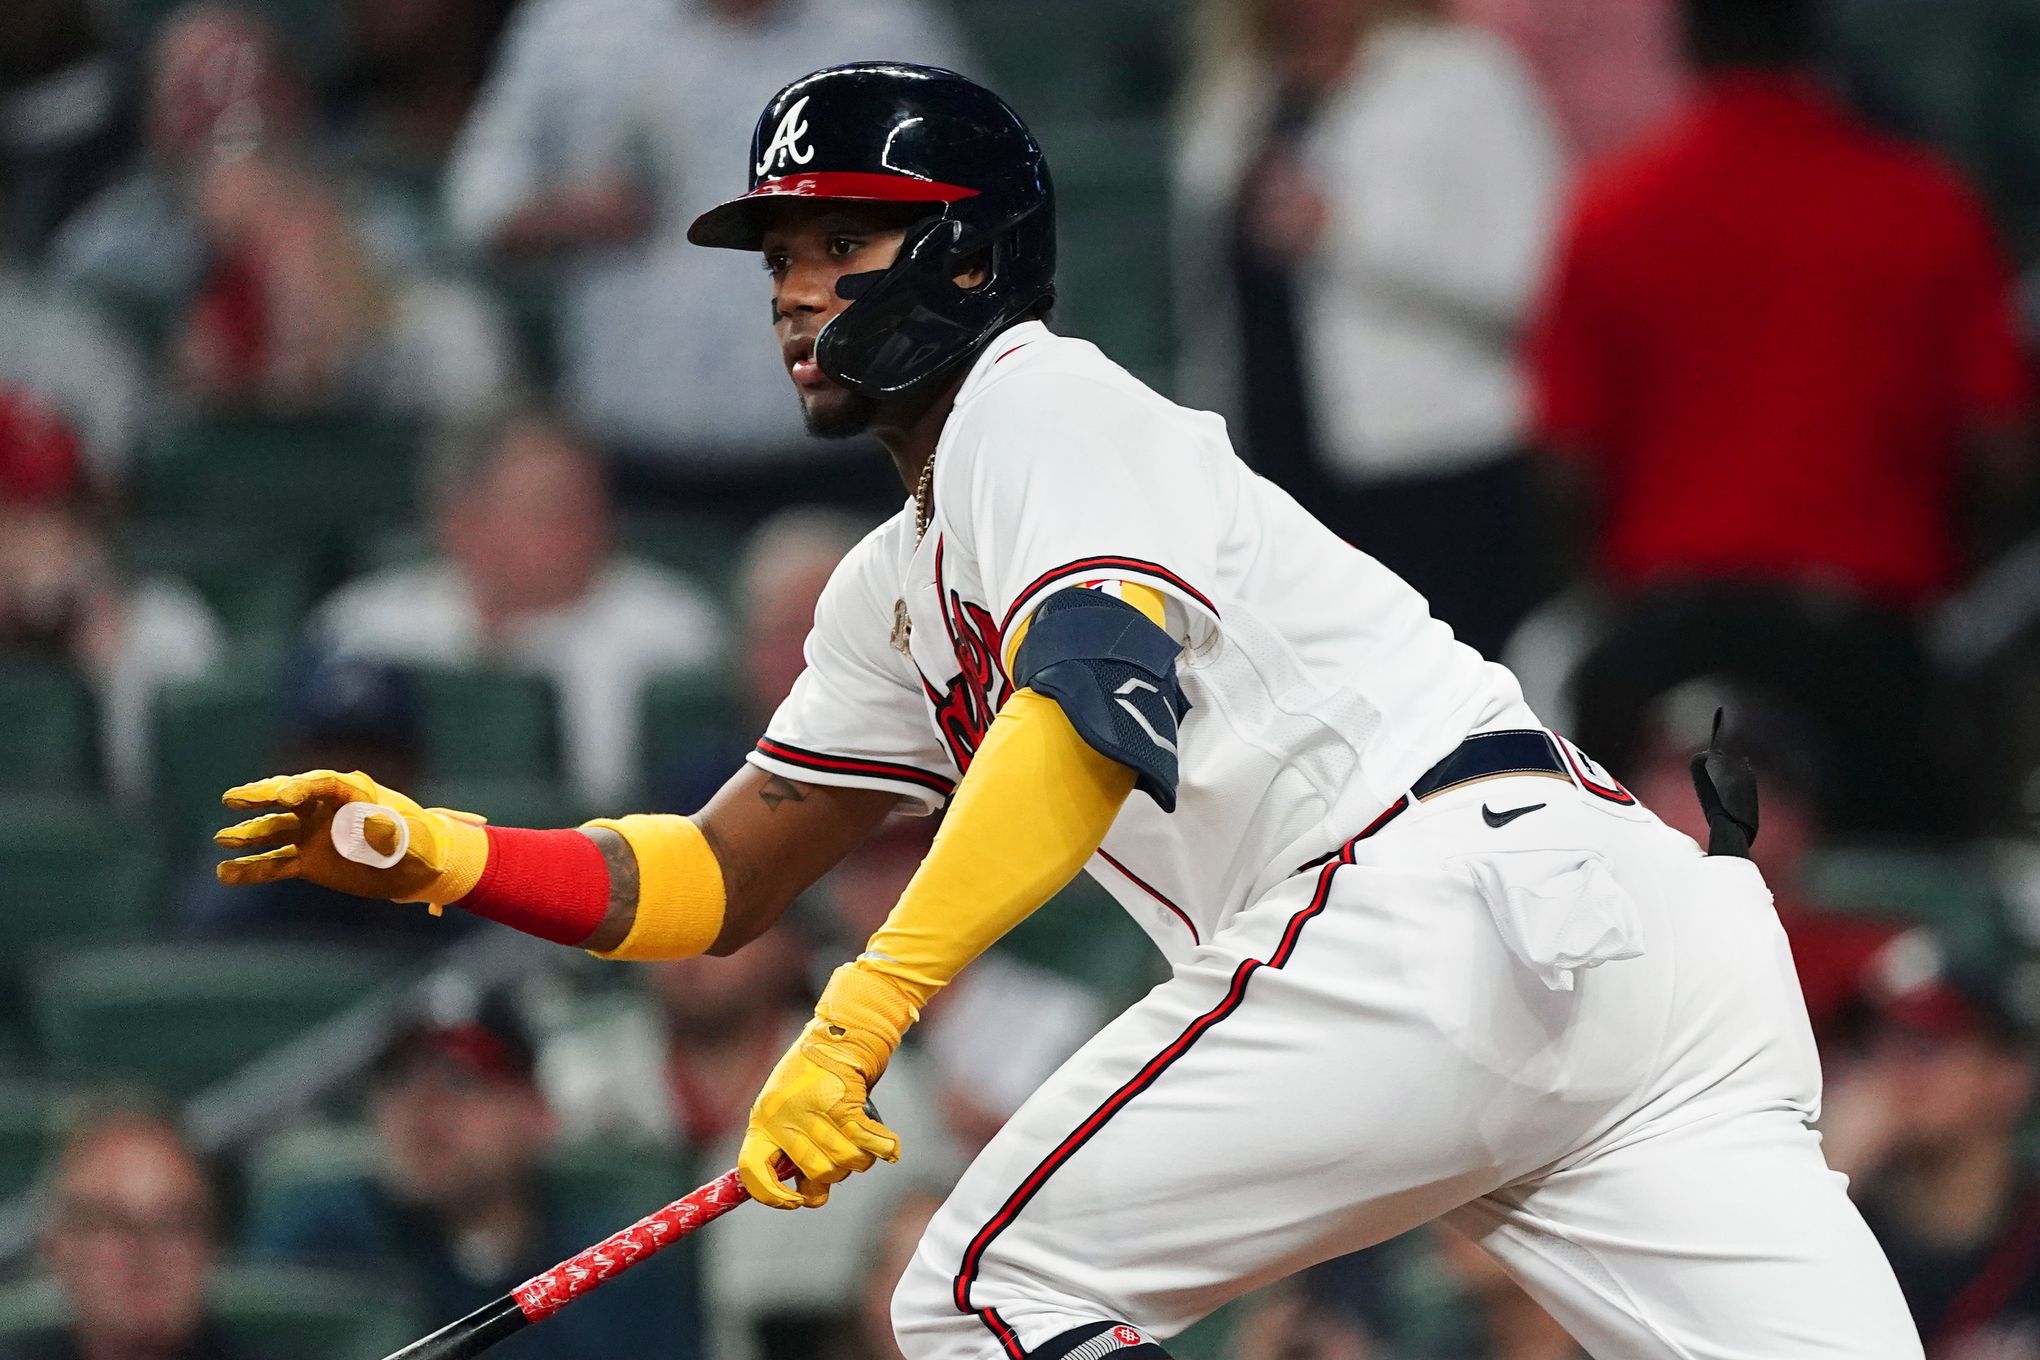 Atlanta Braves OF Eddie Rosario placed on IL with blurred vision